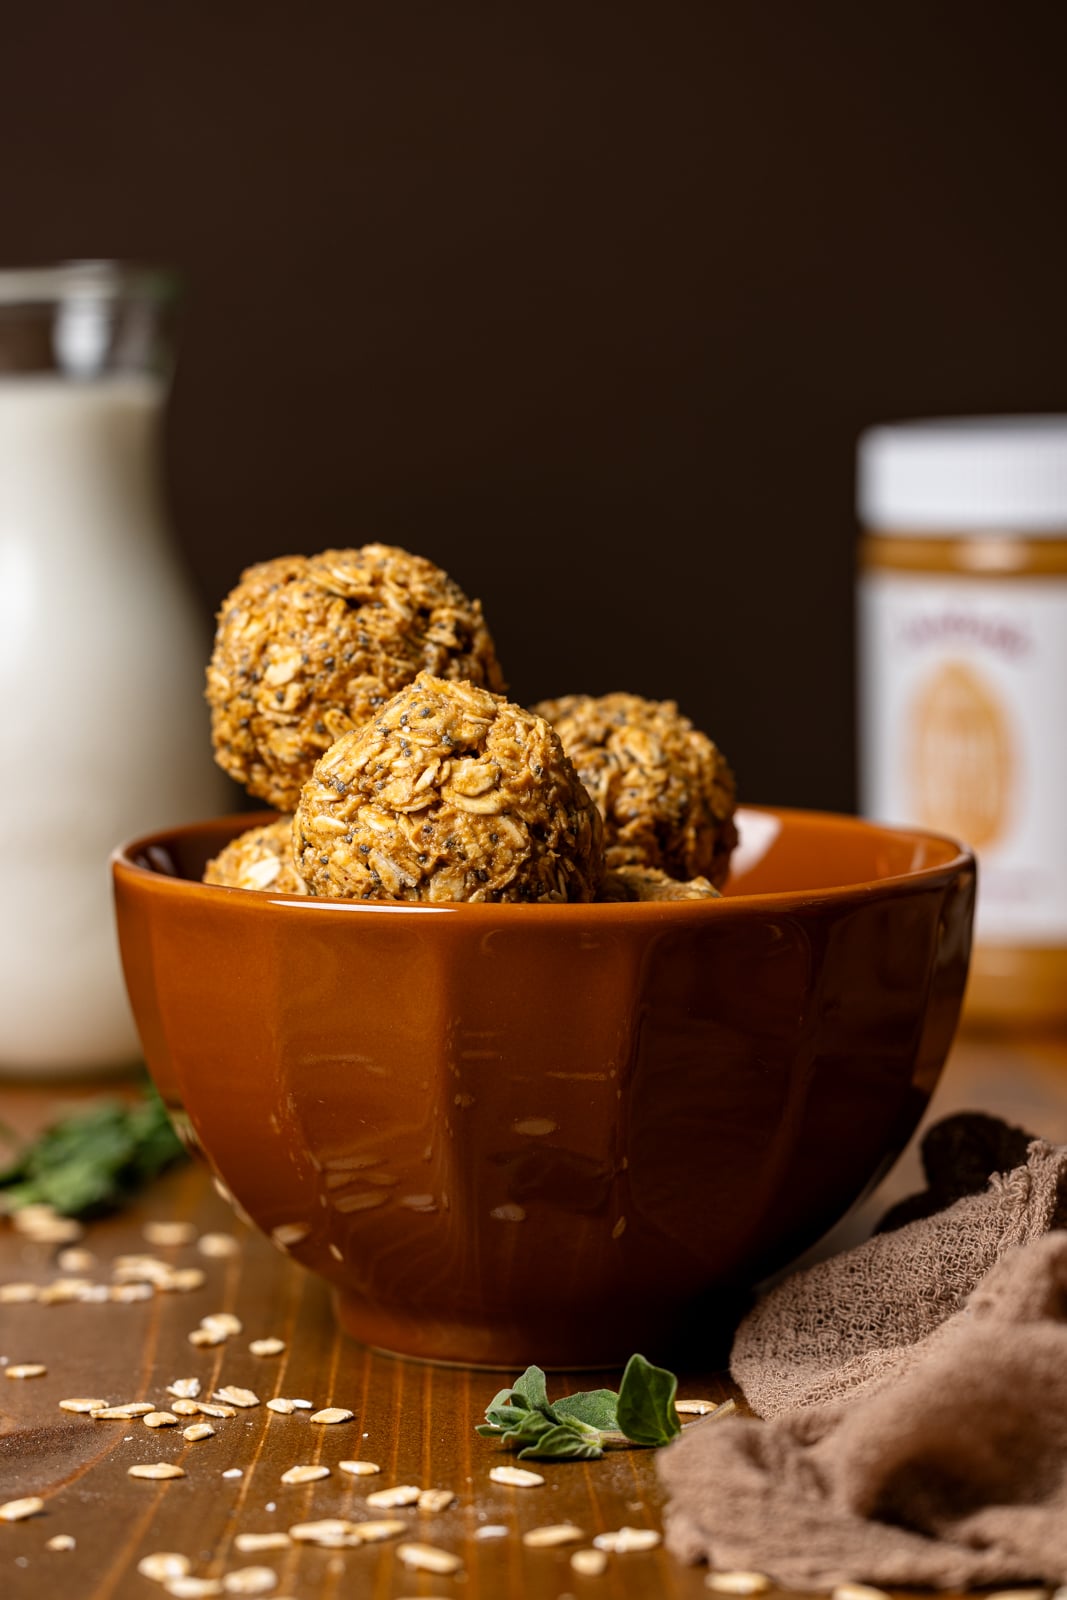 Energy balls in a brown bowl with a glass of milk and jar of peanut butter.